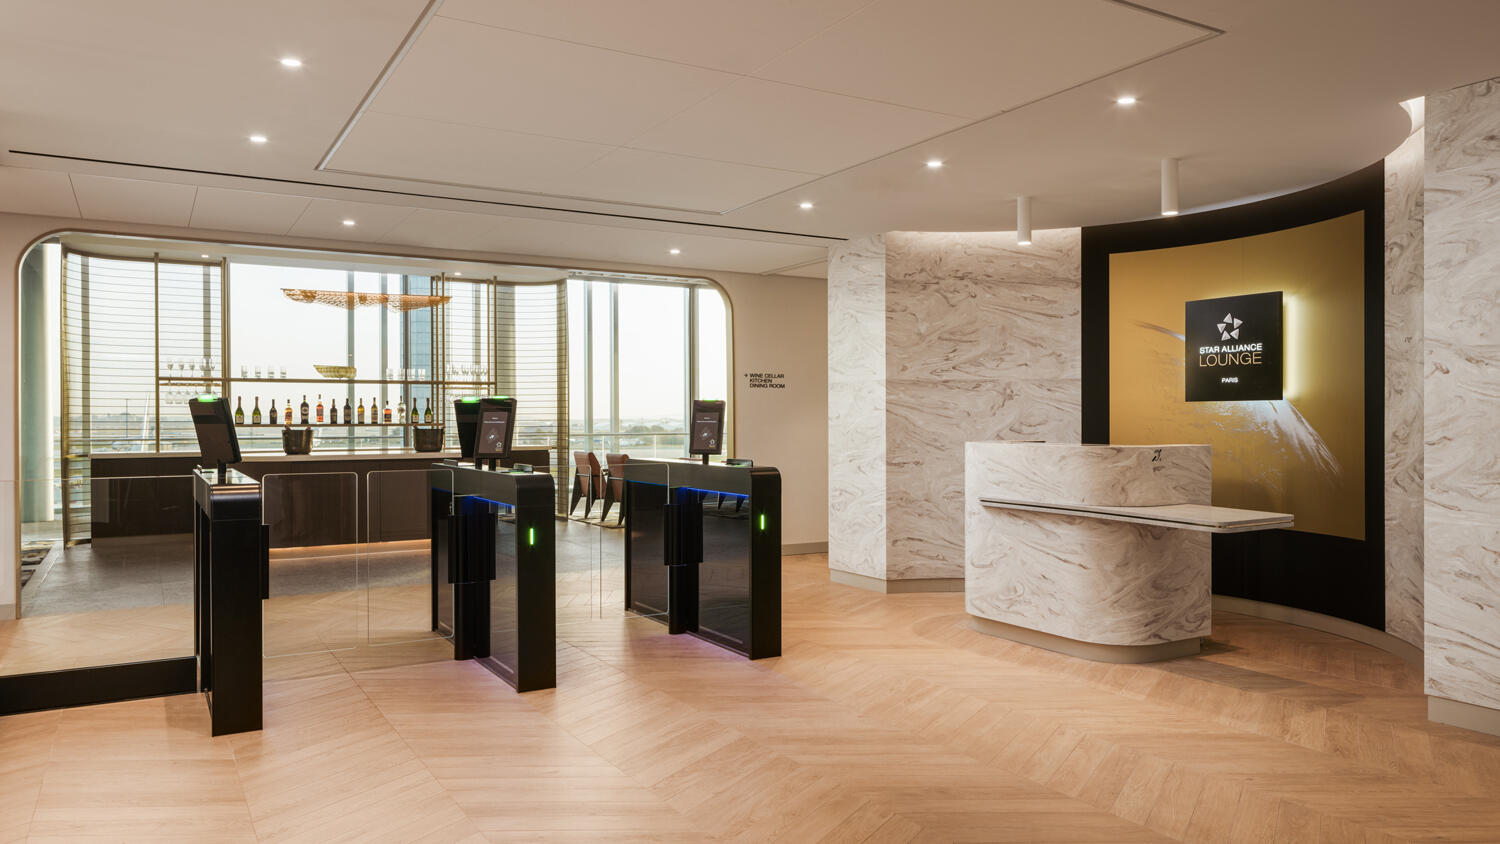 A STAR ABOVE THE REST: STAR ALLIANCE OPENS NEW LOUNGE AT PARIS CHARLES DE GAULLE AIRPORT